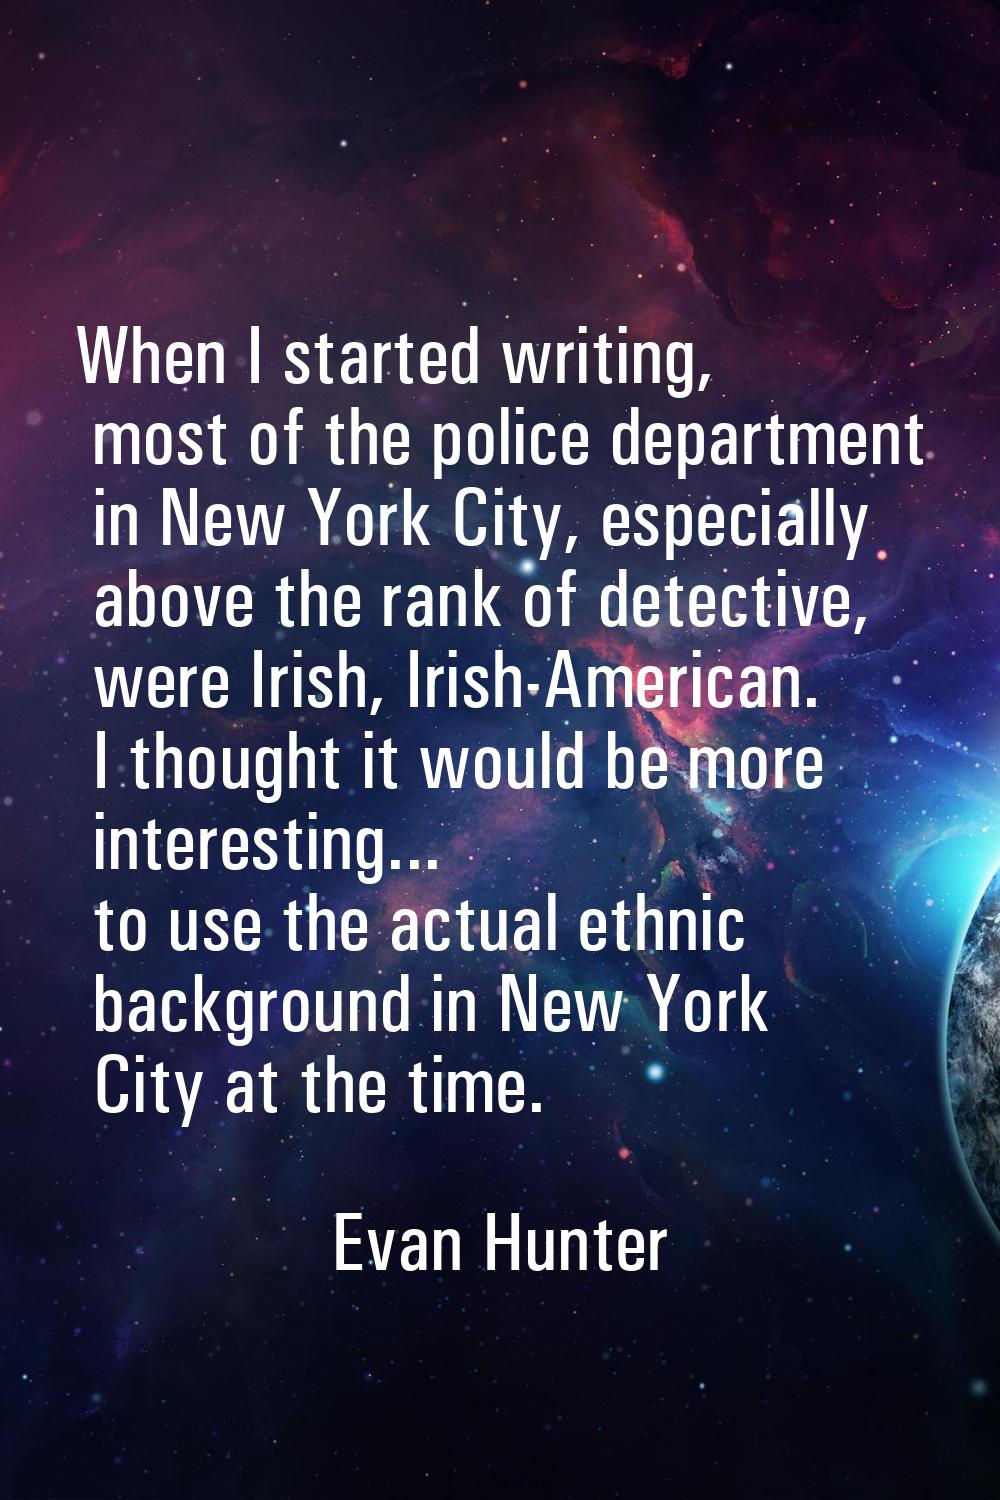 When I started writing, most of the police department in New York City, especially above the rank o